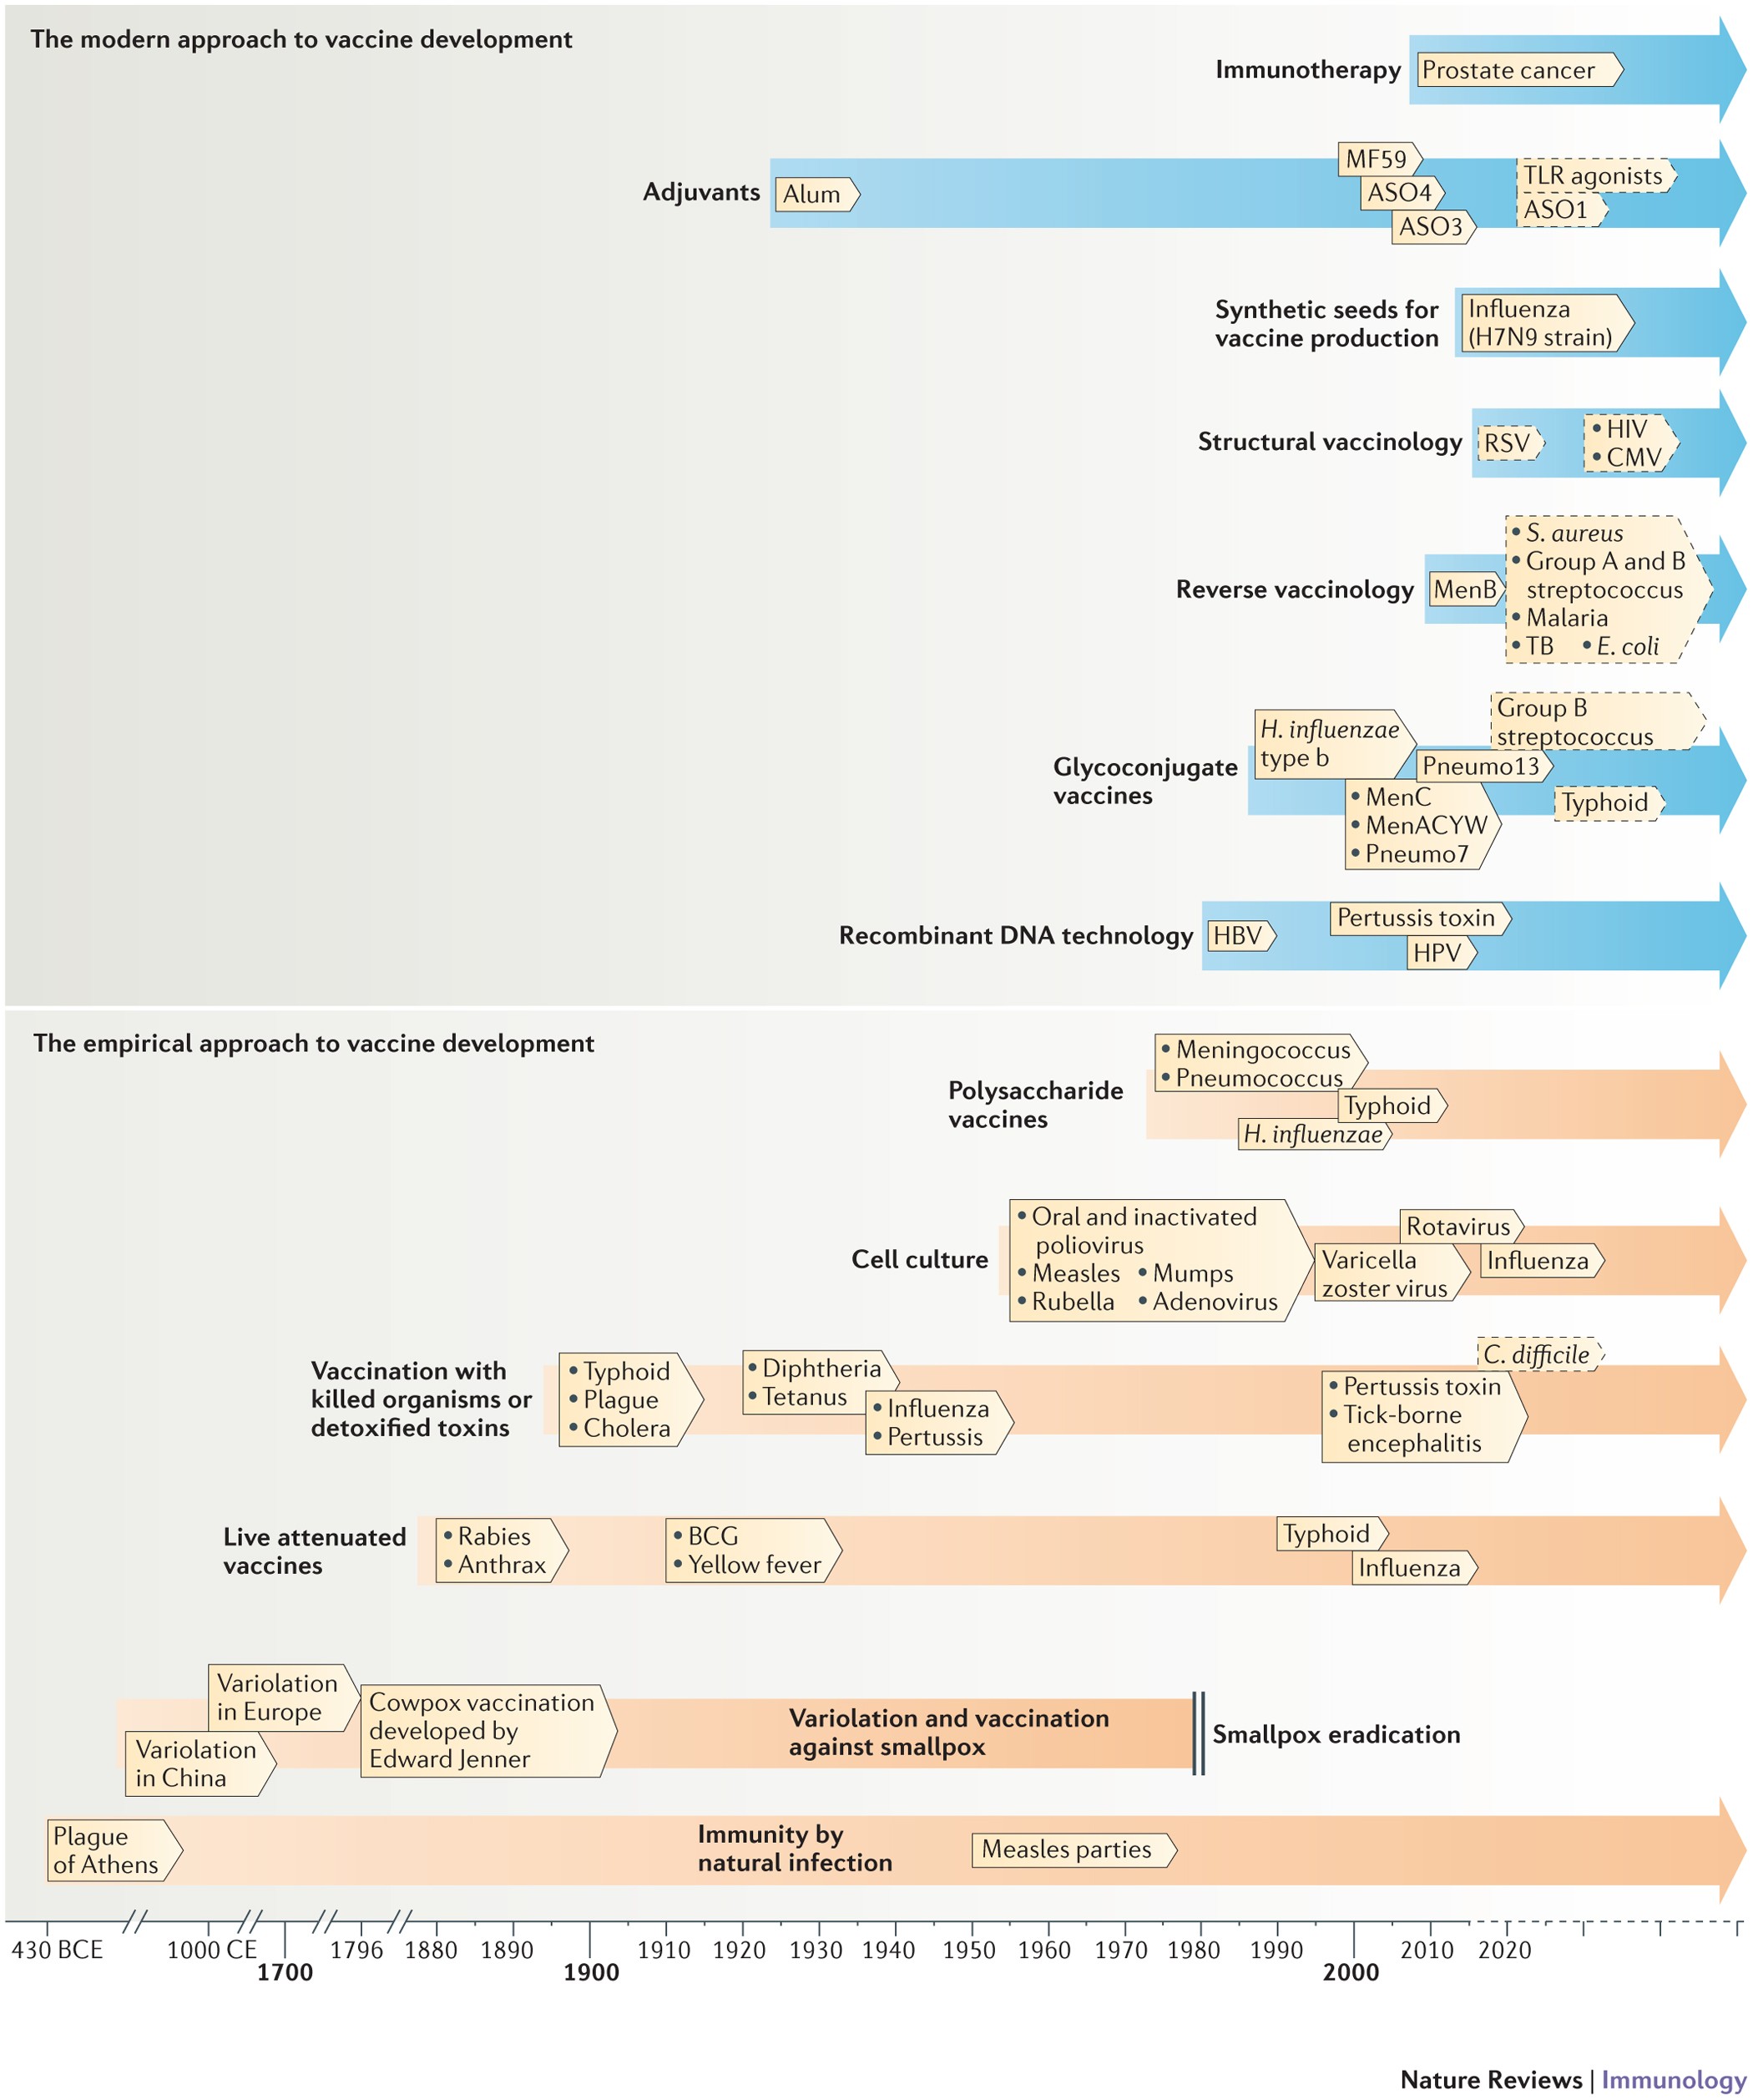 From empiricism to rational design: a personal perspective of the evolution  of vaccine development | Nature Reviews Immunology